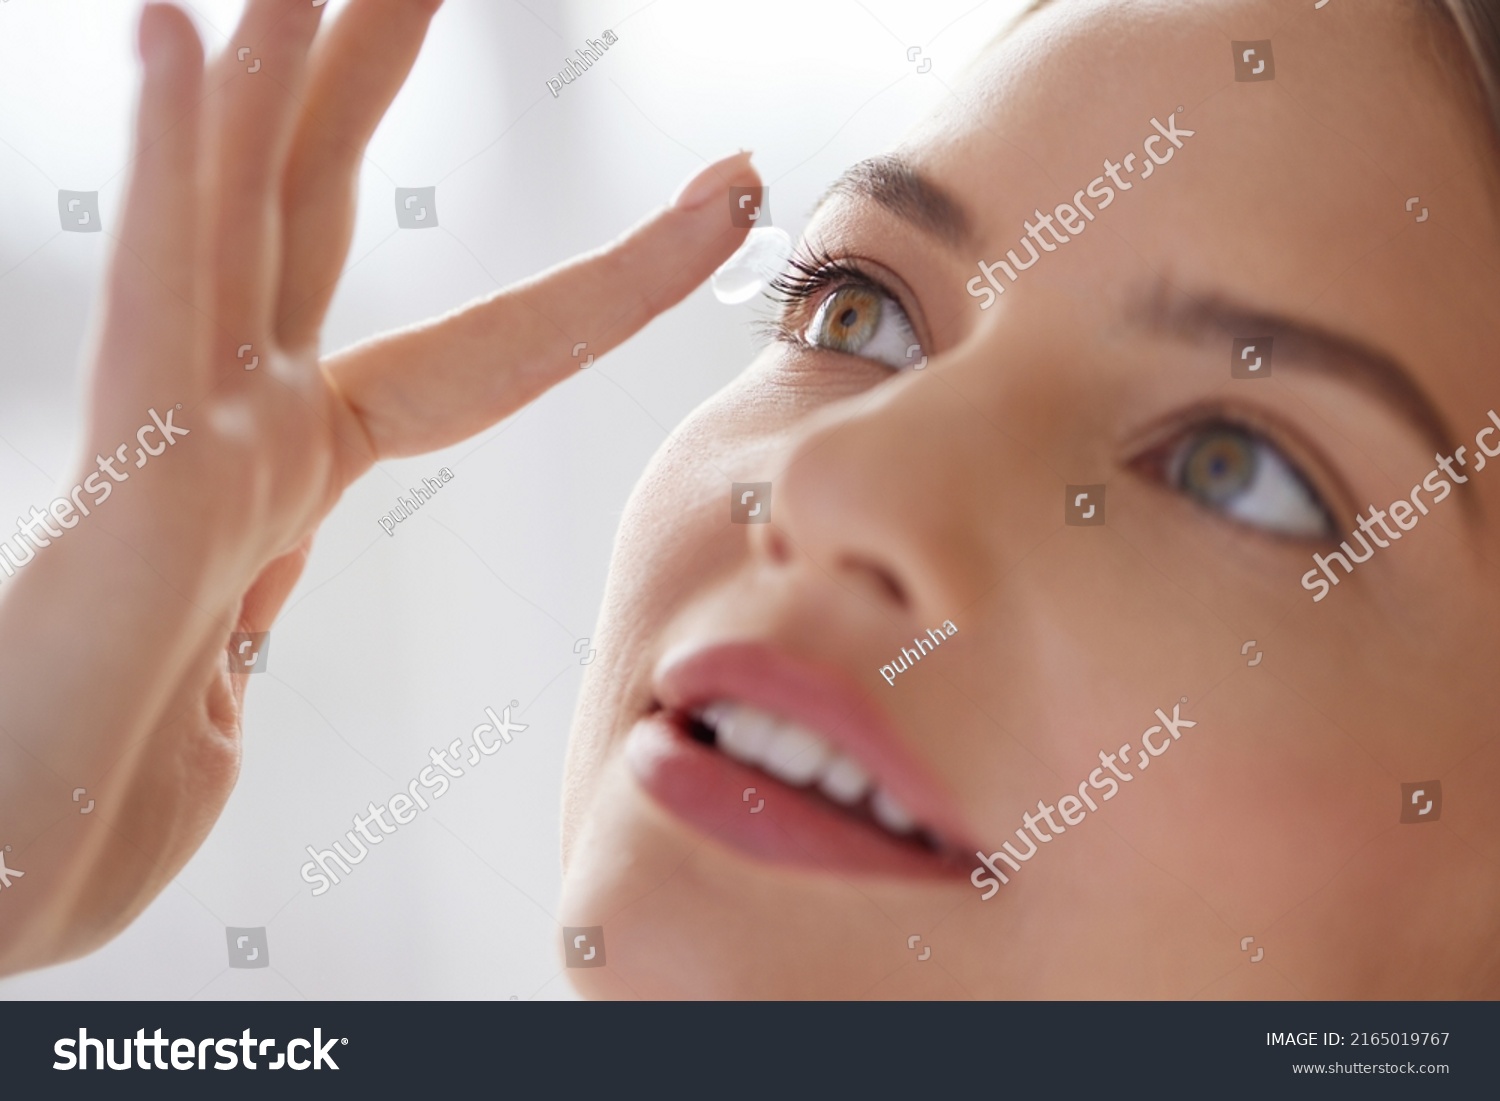 Eye care. Smiling Woman With Contact Lens on Finger Closeup. Smiling Lady with Contact Eye Lenses in Hand. Girl Applying Eye Contacts. Eye Health Care Concept #2165019767